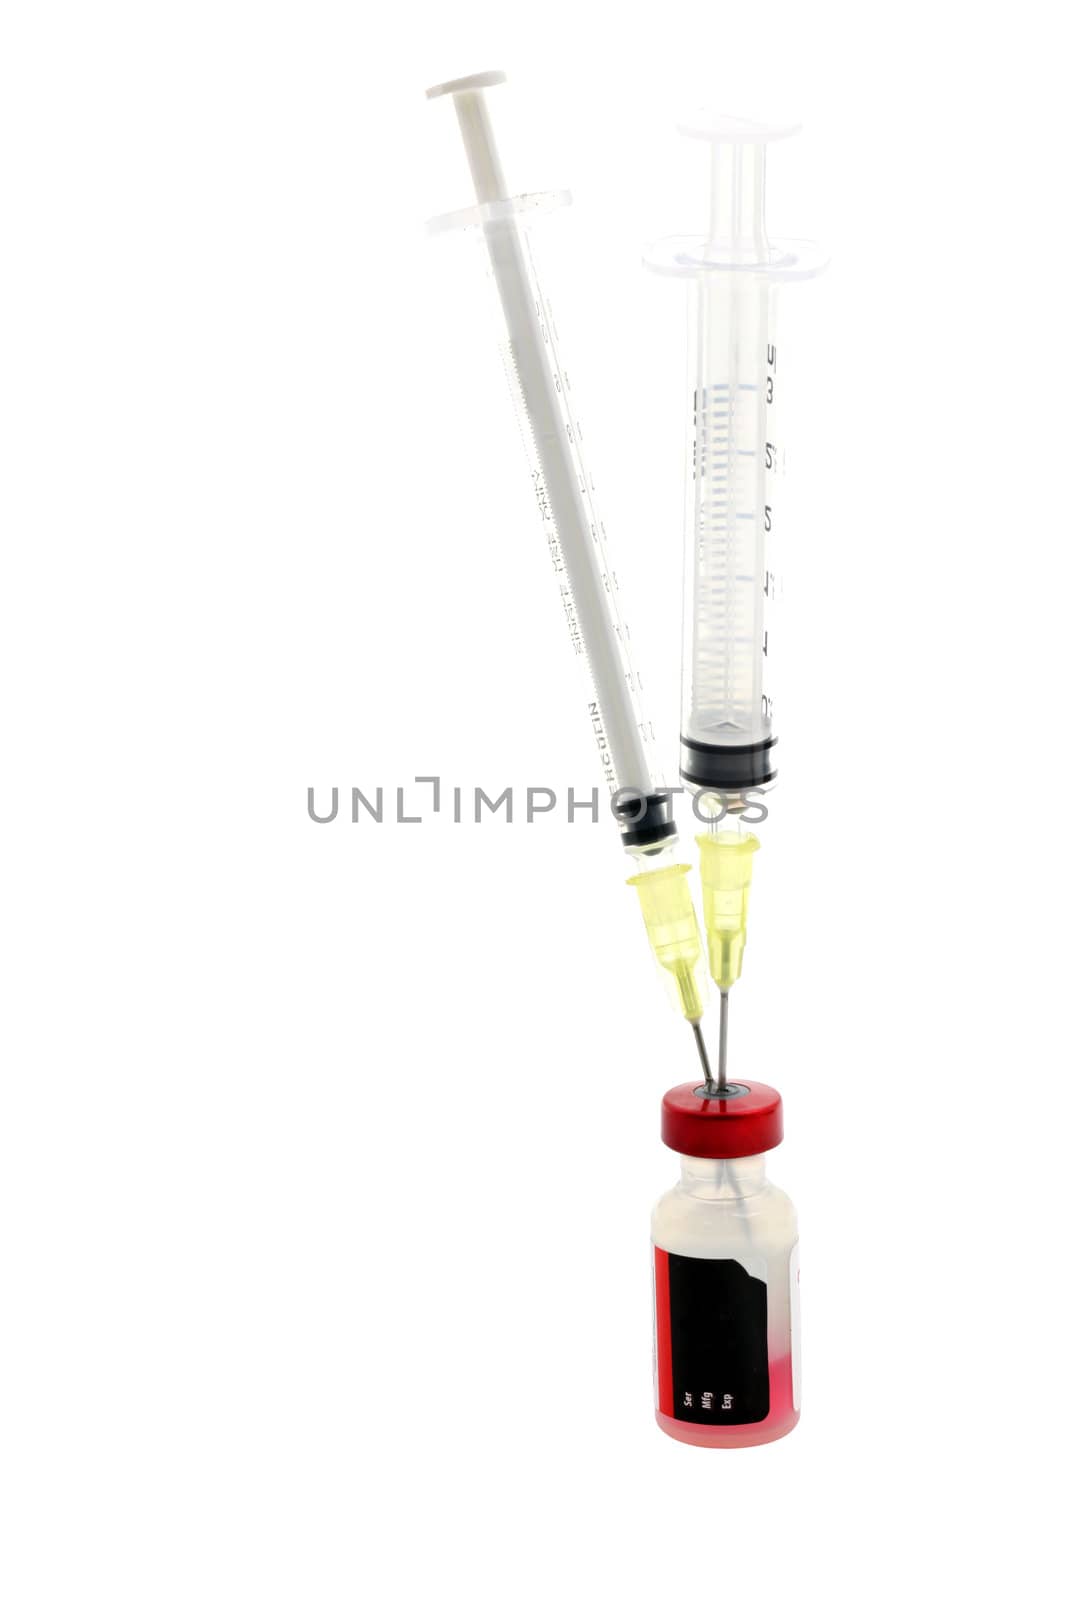 Medical Vaccine and Hypodermic Syringe isolated on white background